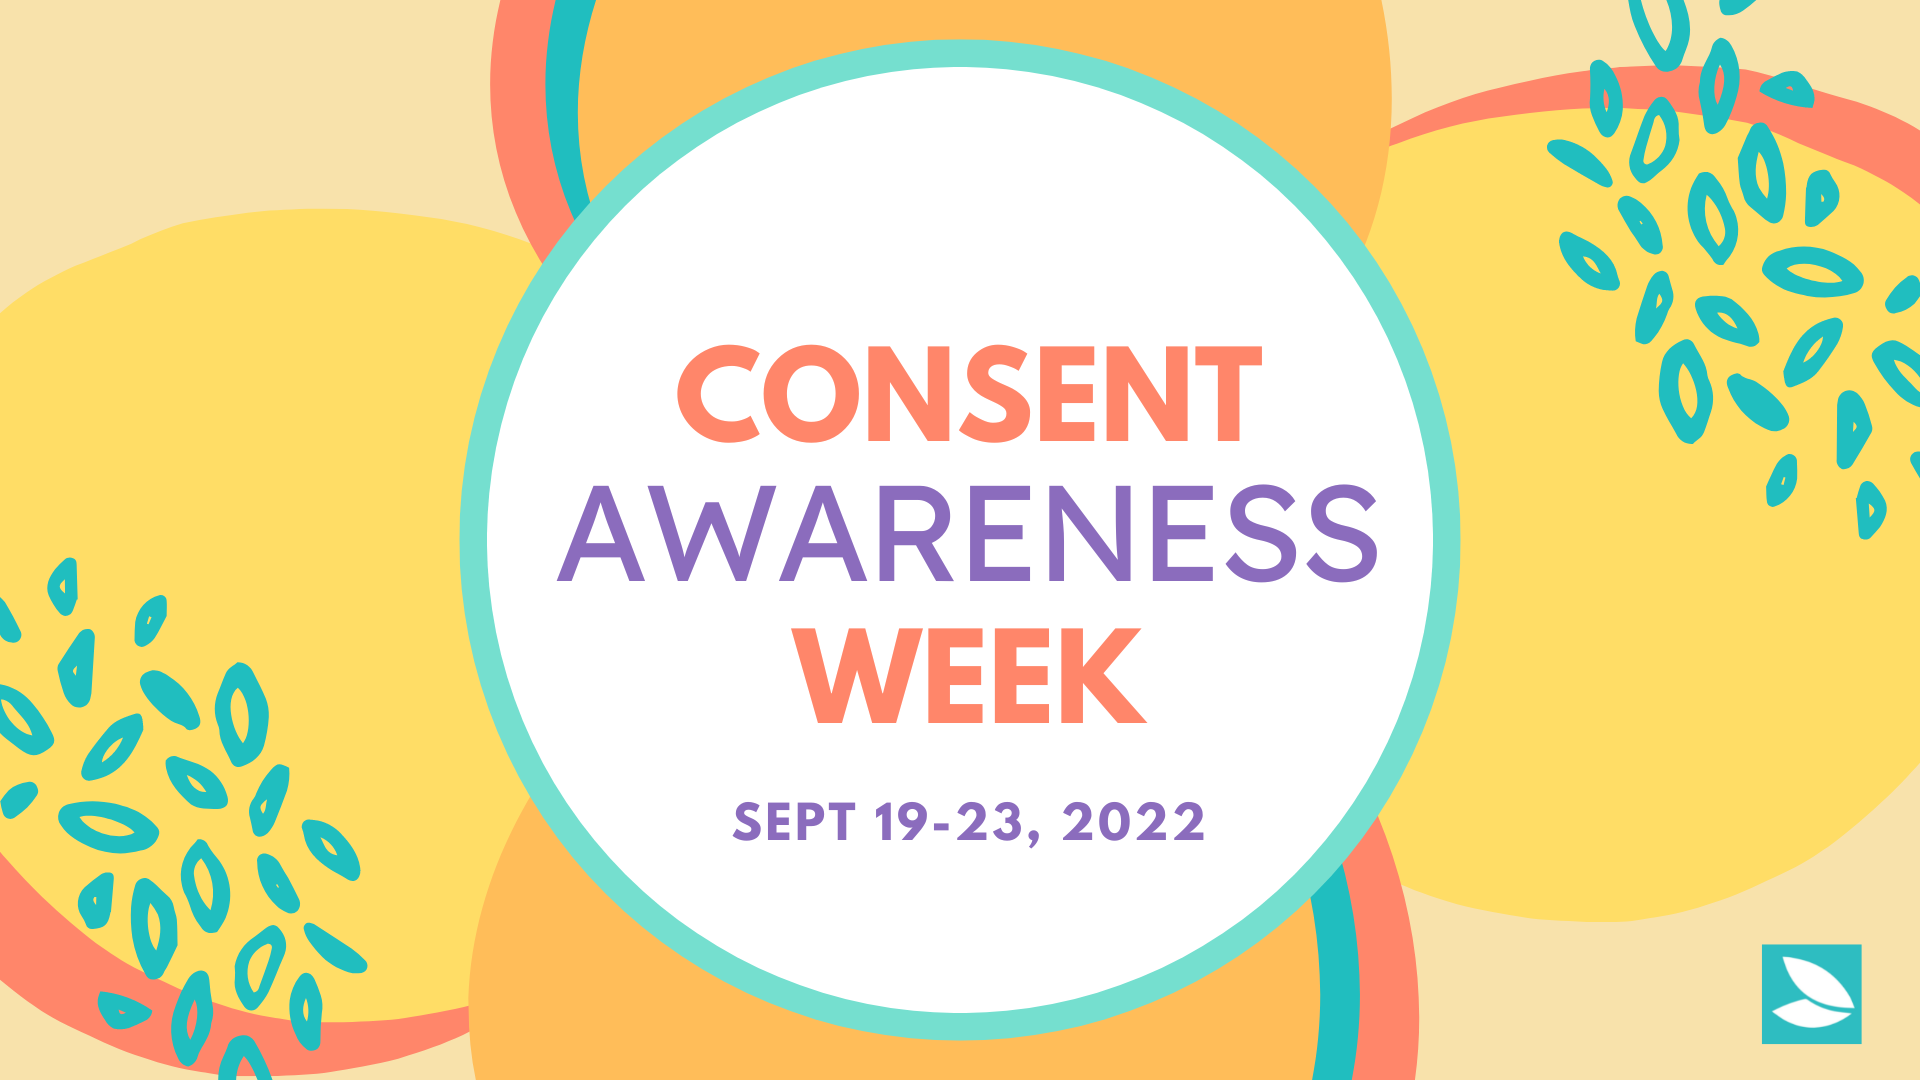 Reflecting, Championing and Celebrating Consent: Ways You Can Participate in Consent Awareness Week